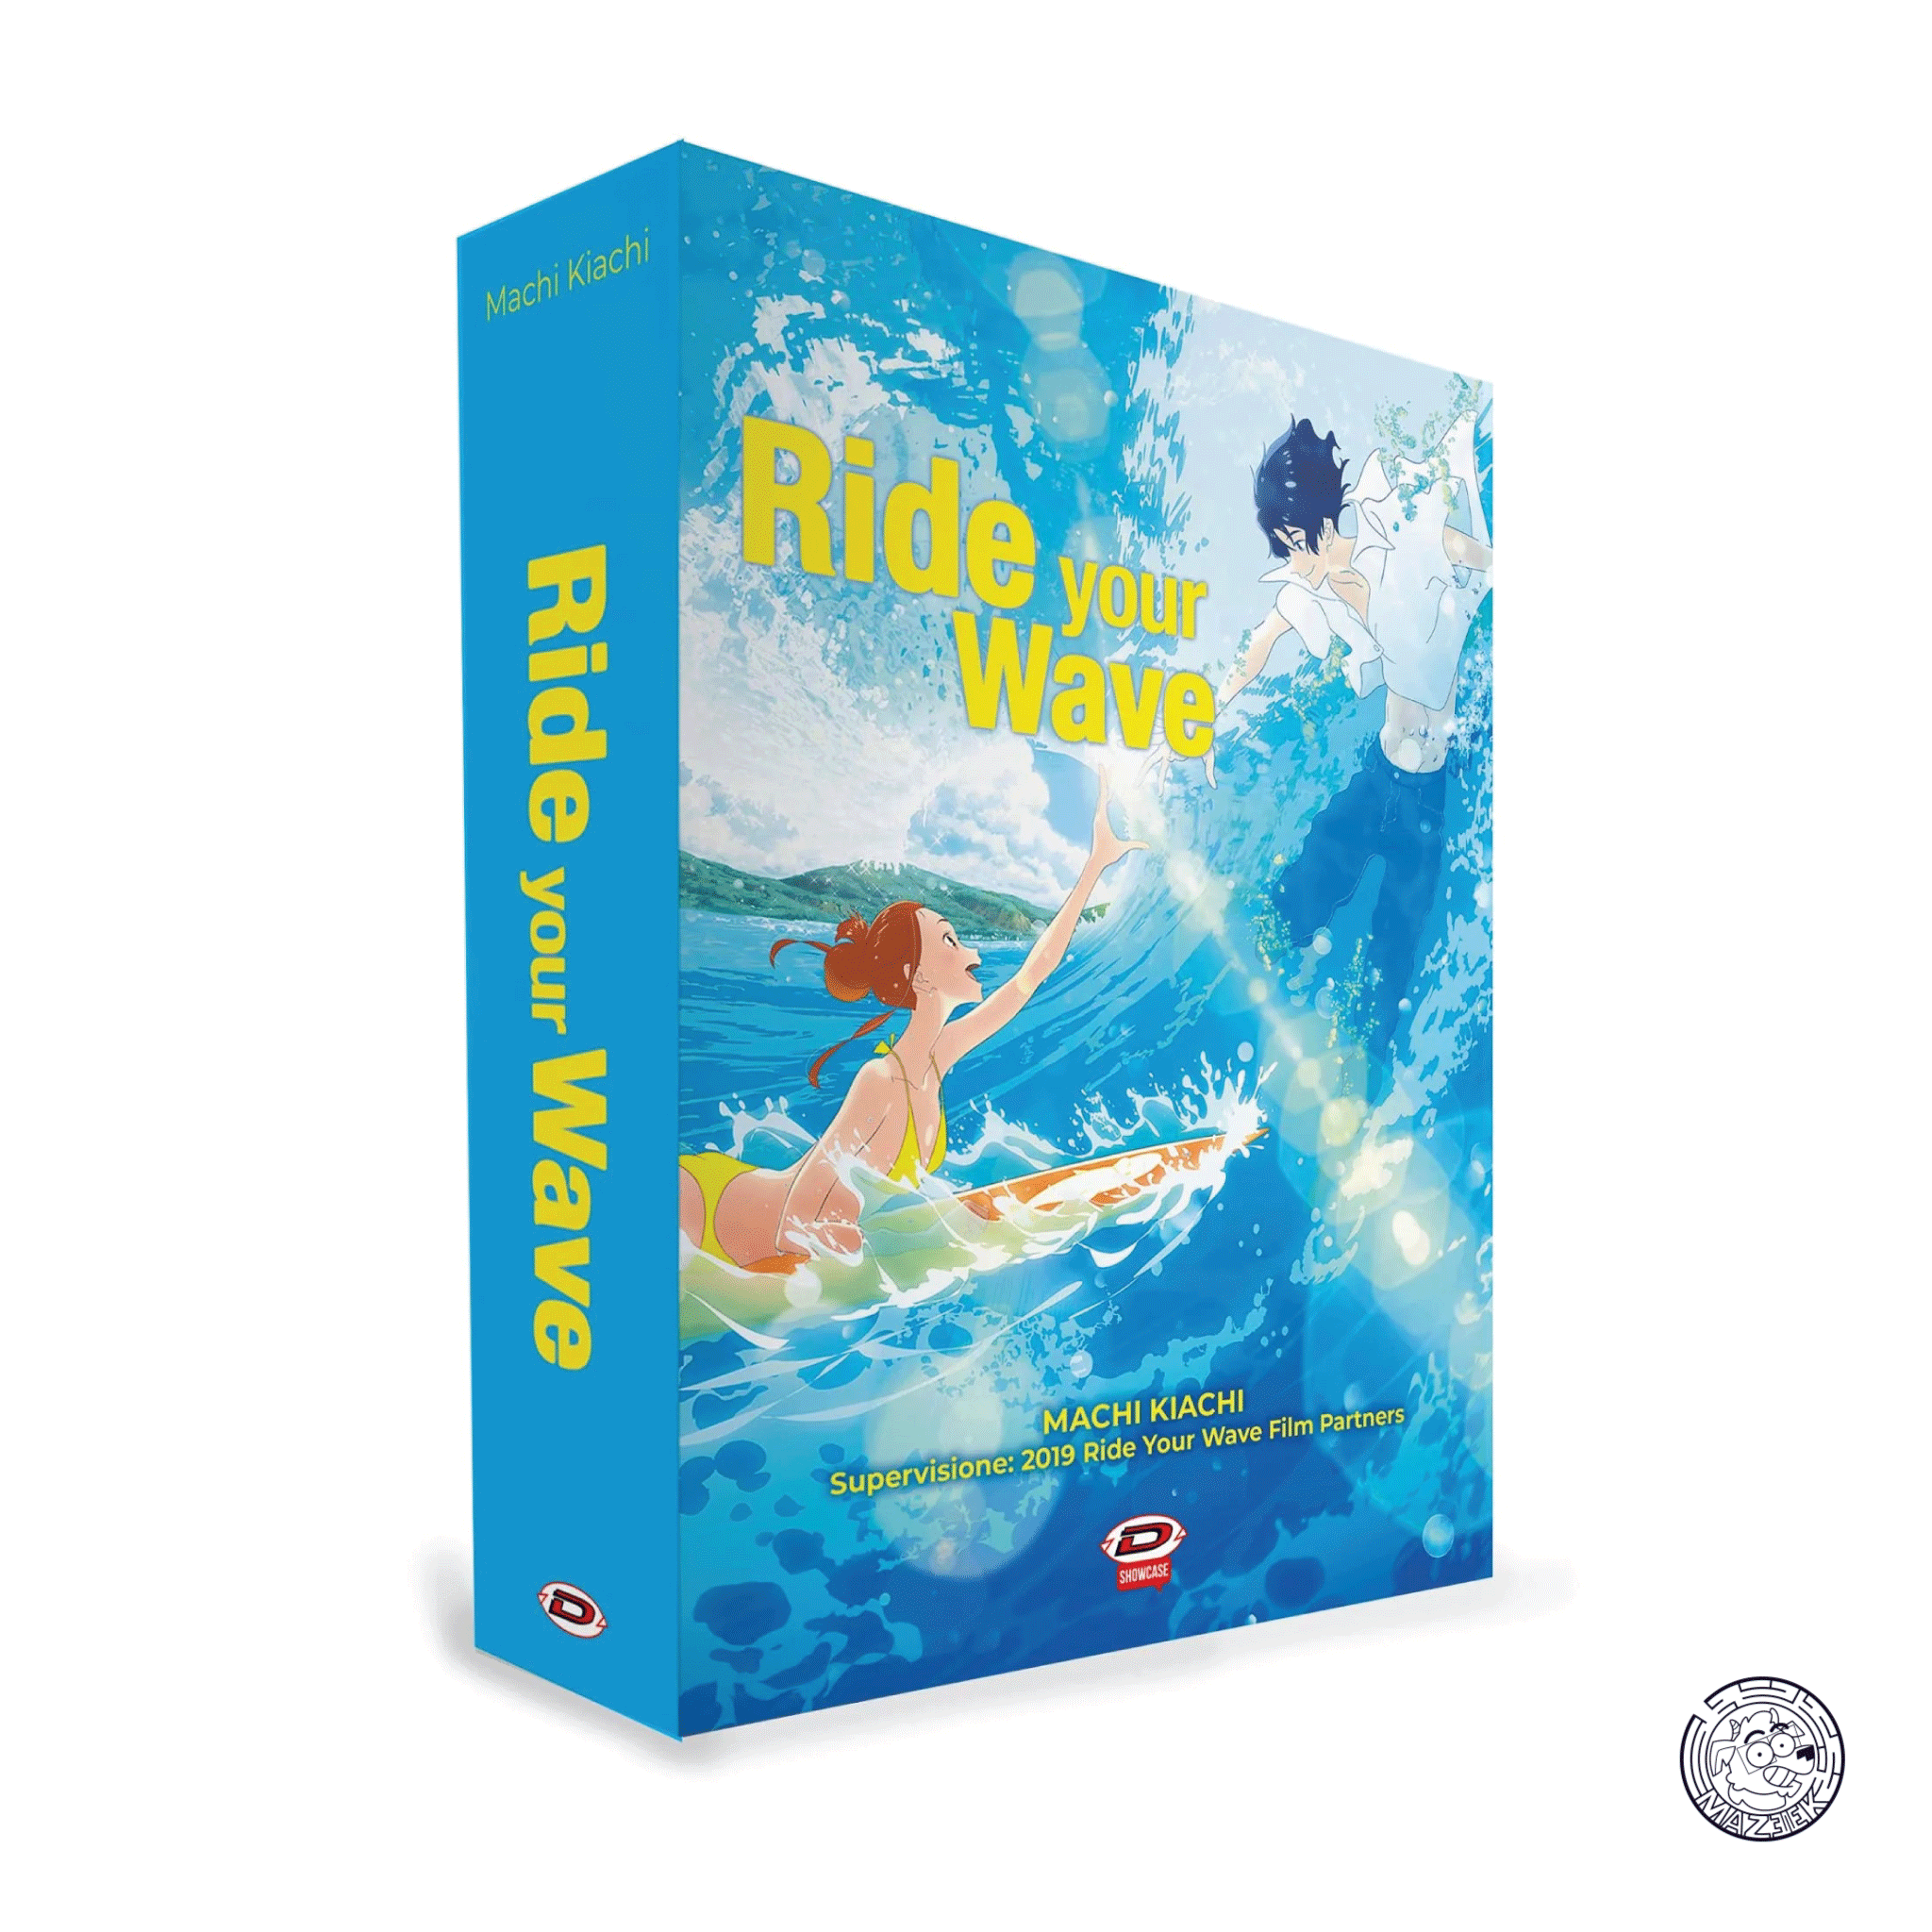 Ride your wave - Box set